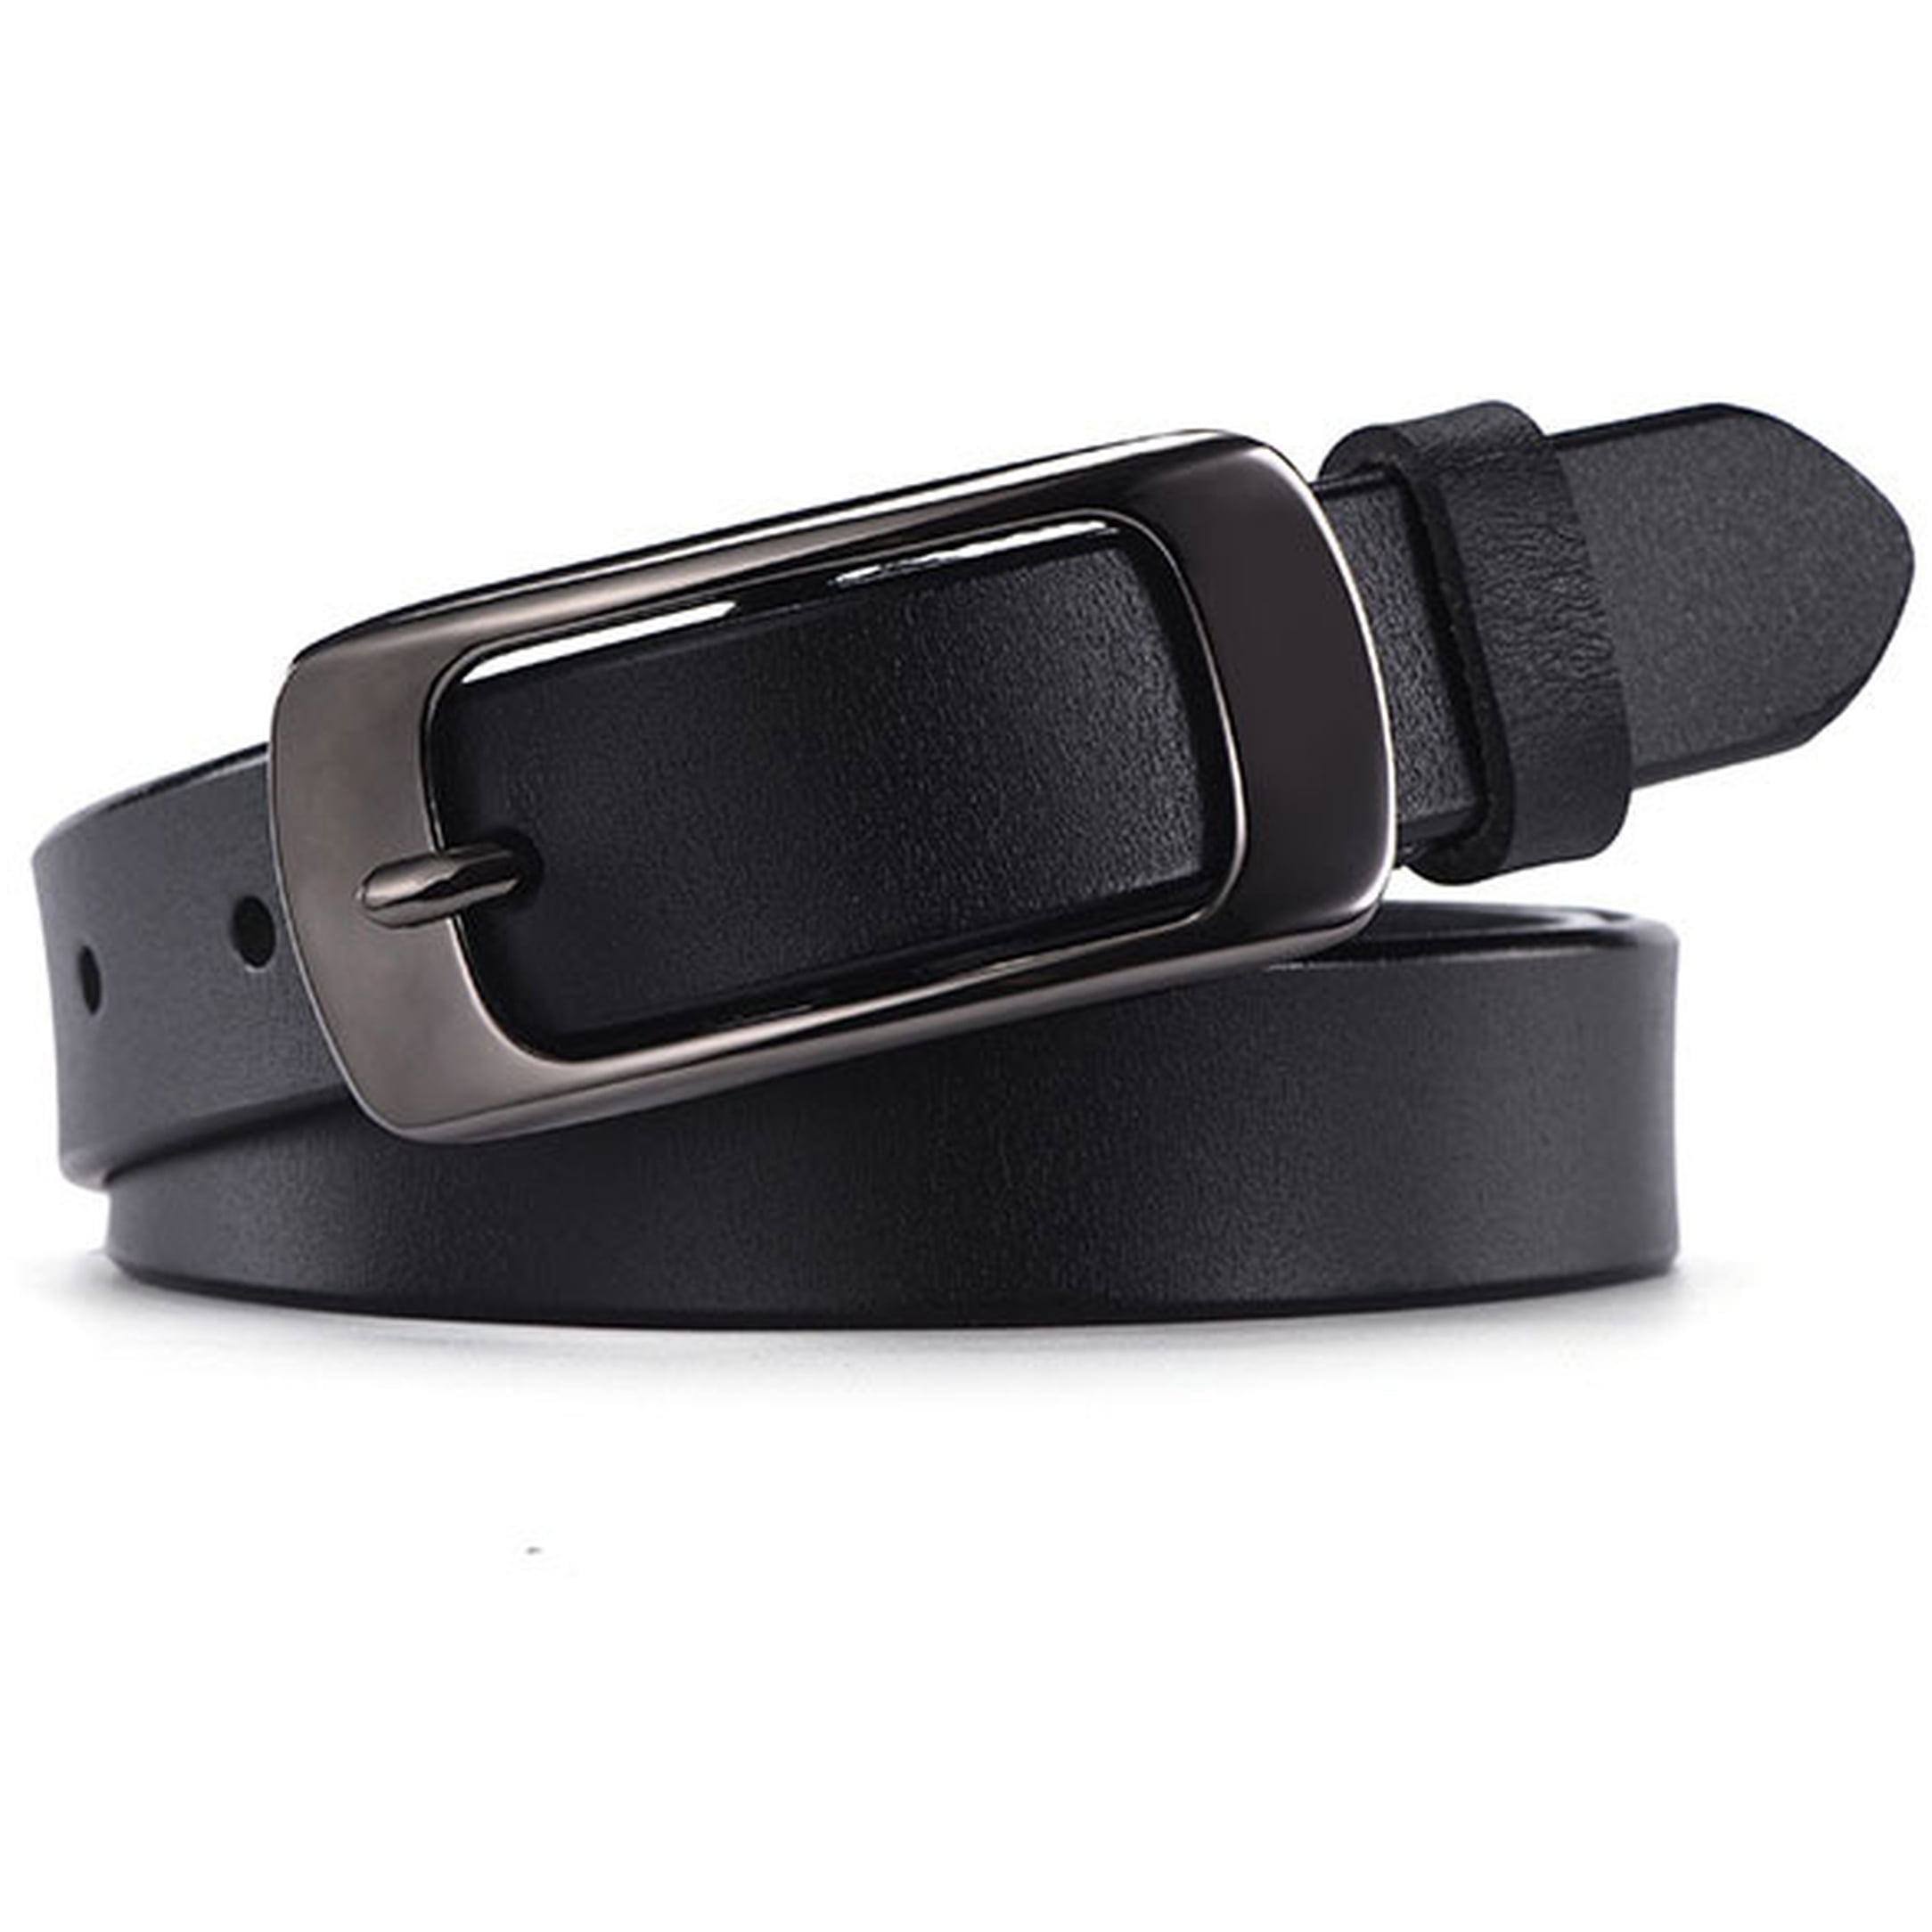 Ayli_AsYouLikeIt - Women's Casual Jean Belt Handcrafted Classic Metal ...